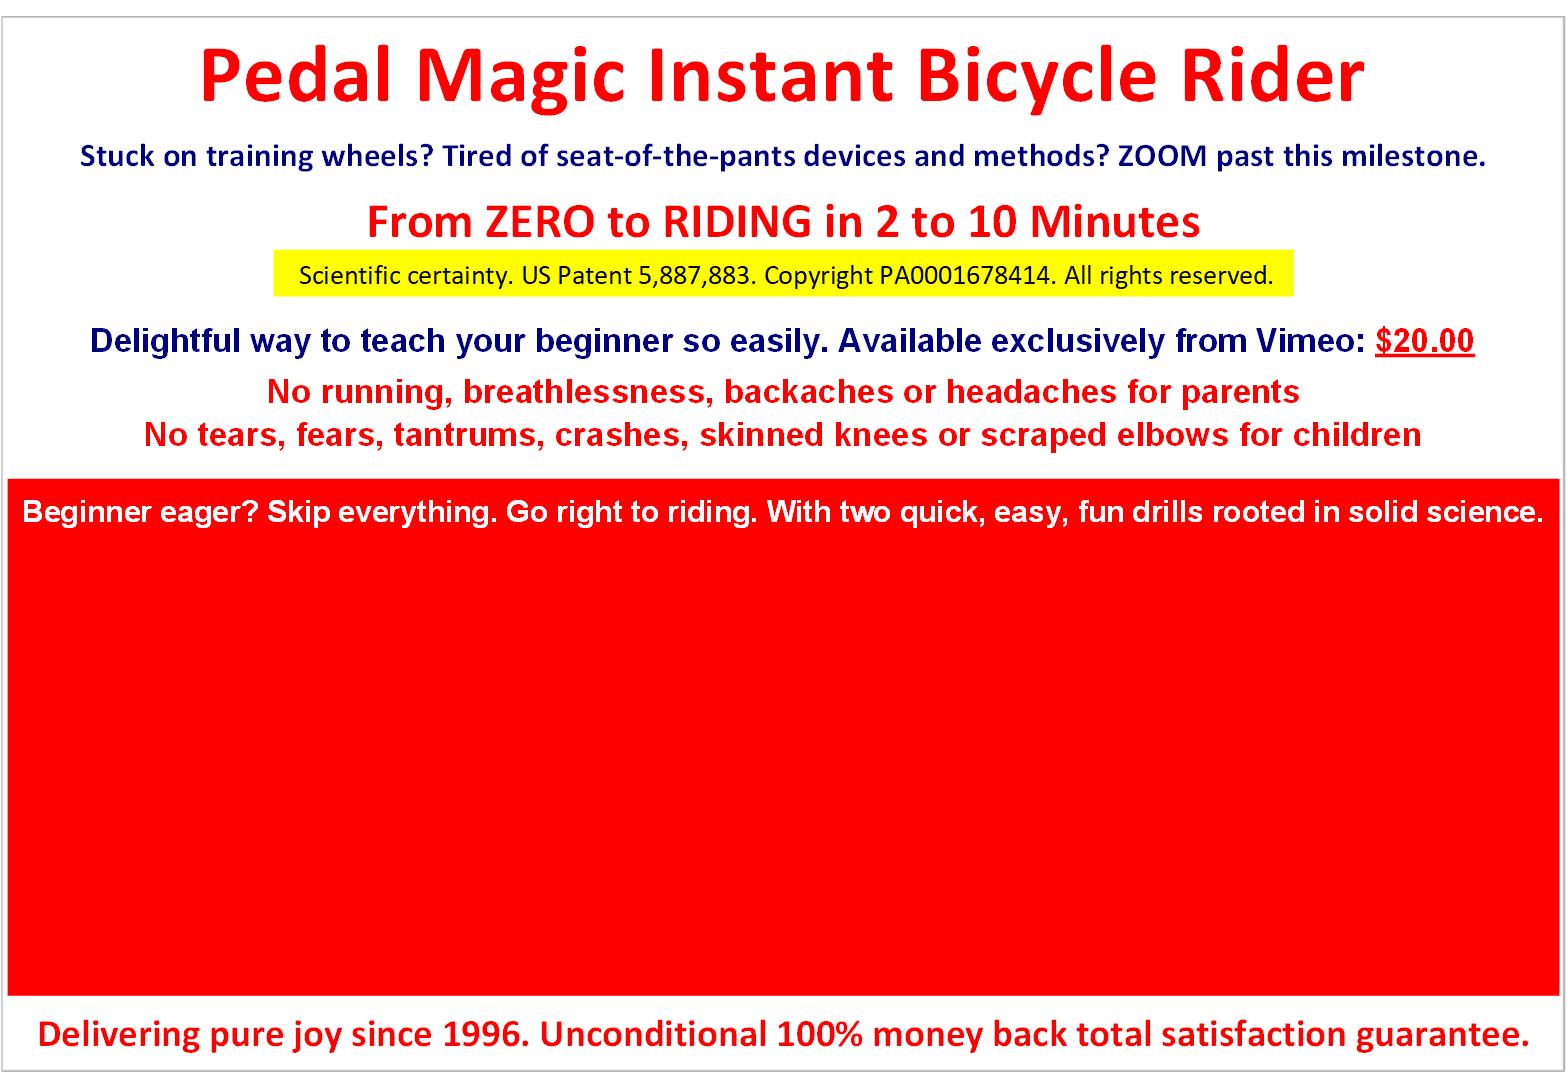 Pedal Magic Instant Bicycle Rider. From ZERO to RIDING in 2 to 10 Minutes. Child stuck on training wheels? Tired of seat-of-the-pants devices and methods? Rocket past this milestone. Teach Bike Riding Learn Bike Riding Easily In 2 To 10 Minutes. Scientific certainty. US Patent 5,887,883. Copyright PA0001678414. All rights reserved. Delightful way to teach your beginner bike riding easily, instantly. Now available exclusively from Vimeo. No running, breathlessness, backaches or headaches for parent. No tears, fears, tantrums, crashes, skinned knees or scraped elbows for child. Pedal Magic Instant Bicycle Rider is single-mindedly laser-focused on results - changing eager non-riders into joyful riders in a snap. Delivering pure joy since 1996. Unconditional 100% money back total satisfaction guarantee. Watch free trailer for a peek inside and peel off a layer of mystery and/or to order the full video from Vimeo.